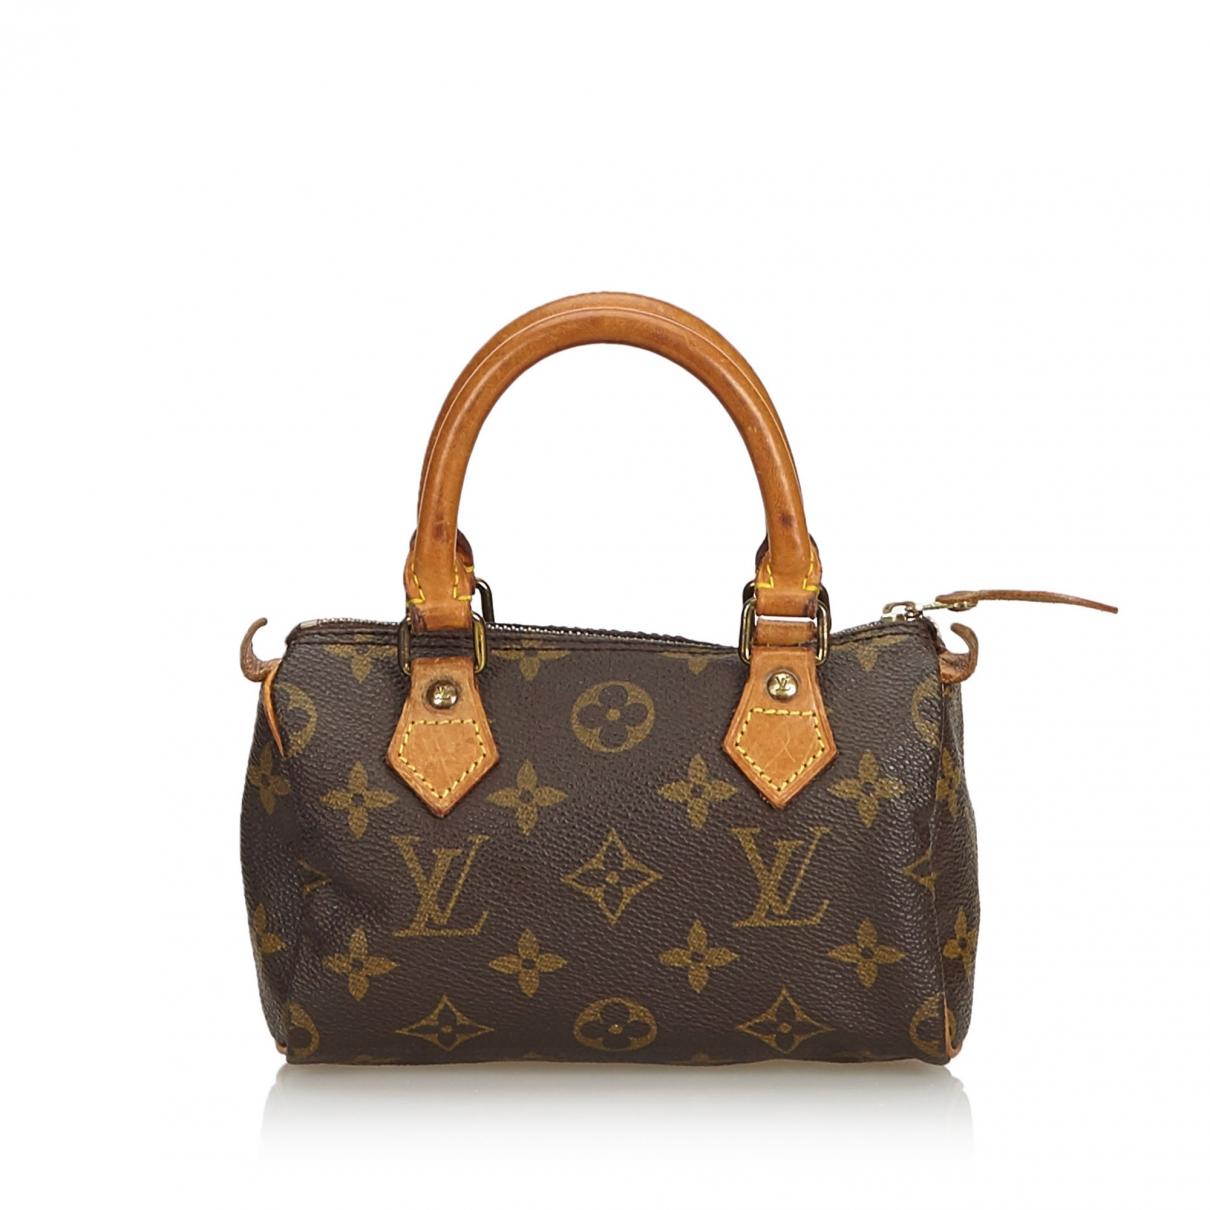 Sold at Auction: LOUIS VUITTON MONOGRAM SPEEDY BAG - France, April 1998.  Monogram canvas with leather handles and detailing. With lock, no key.  Interior flap pocket. Numbered SD0948. 8 1/2 H x